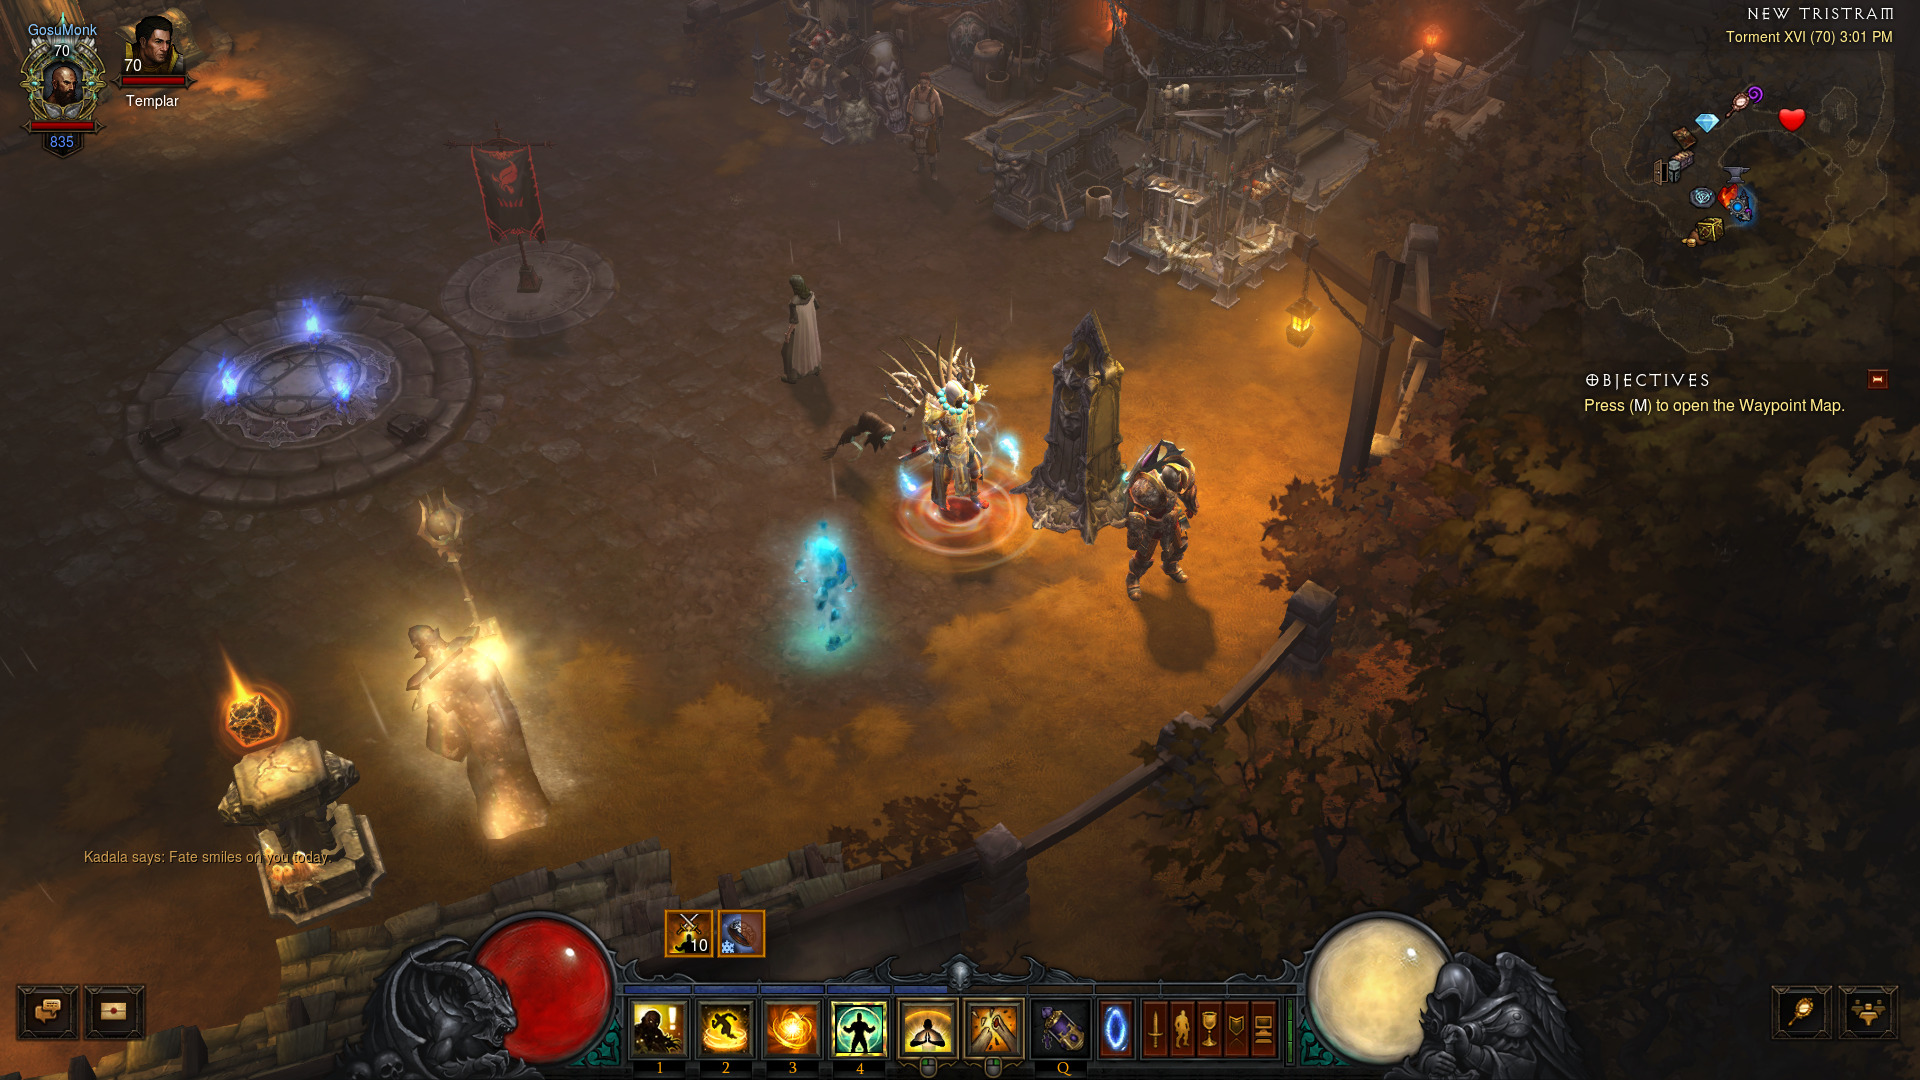 How to Use Whisper of Atonement in Diablo 3?